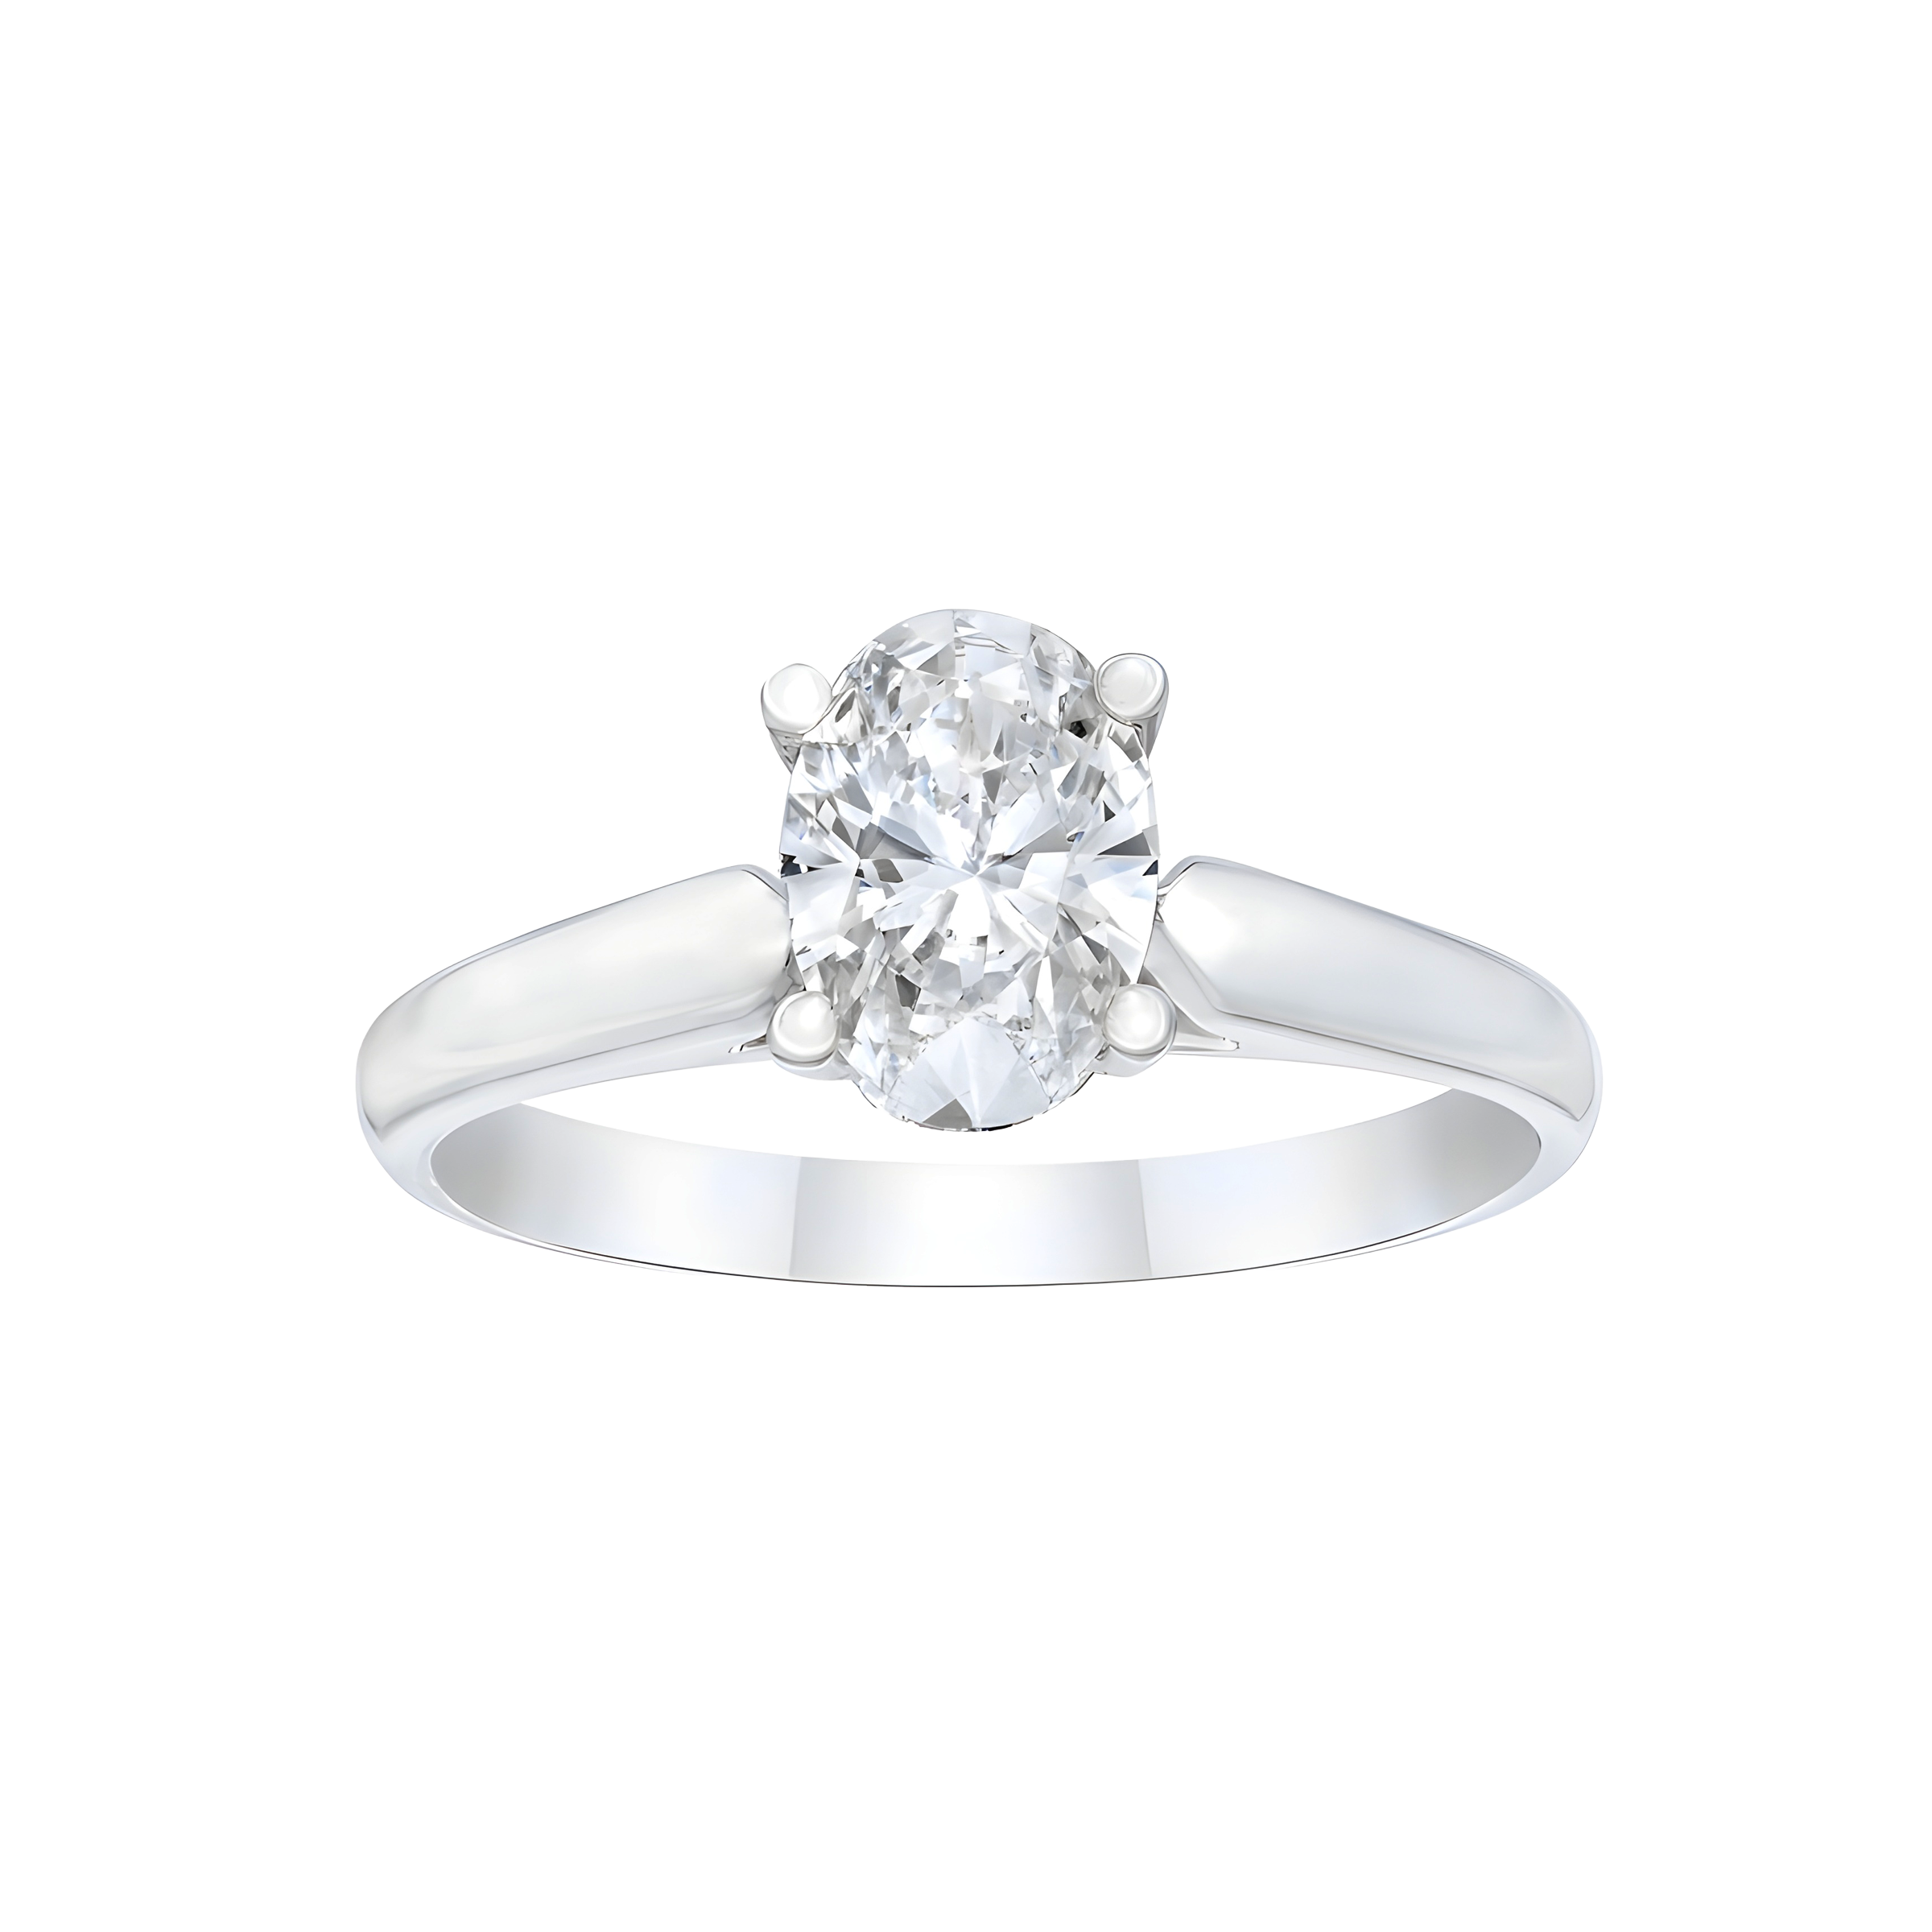 Oval Shaped Solitaire Diamond Engagement Ring in Platinum